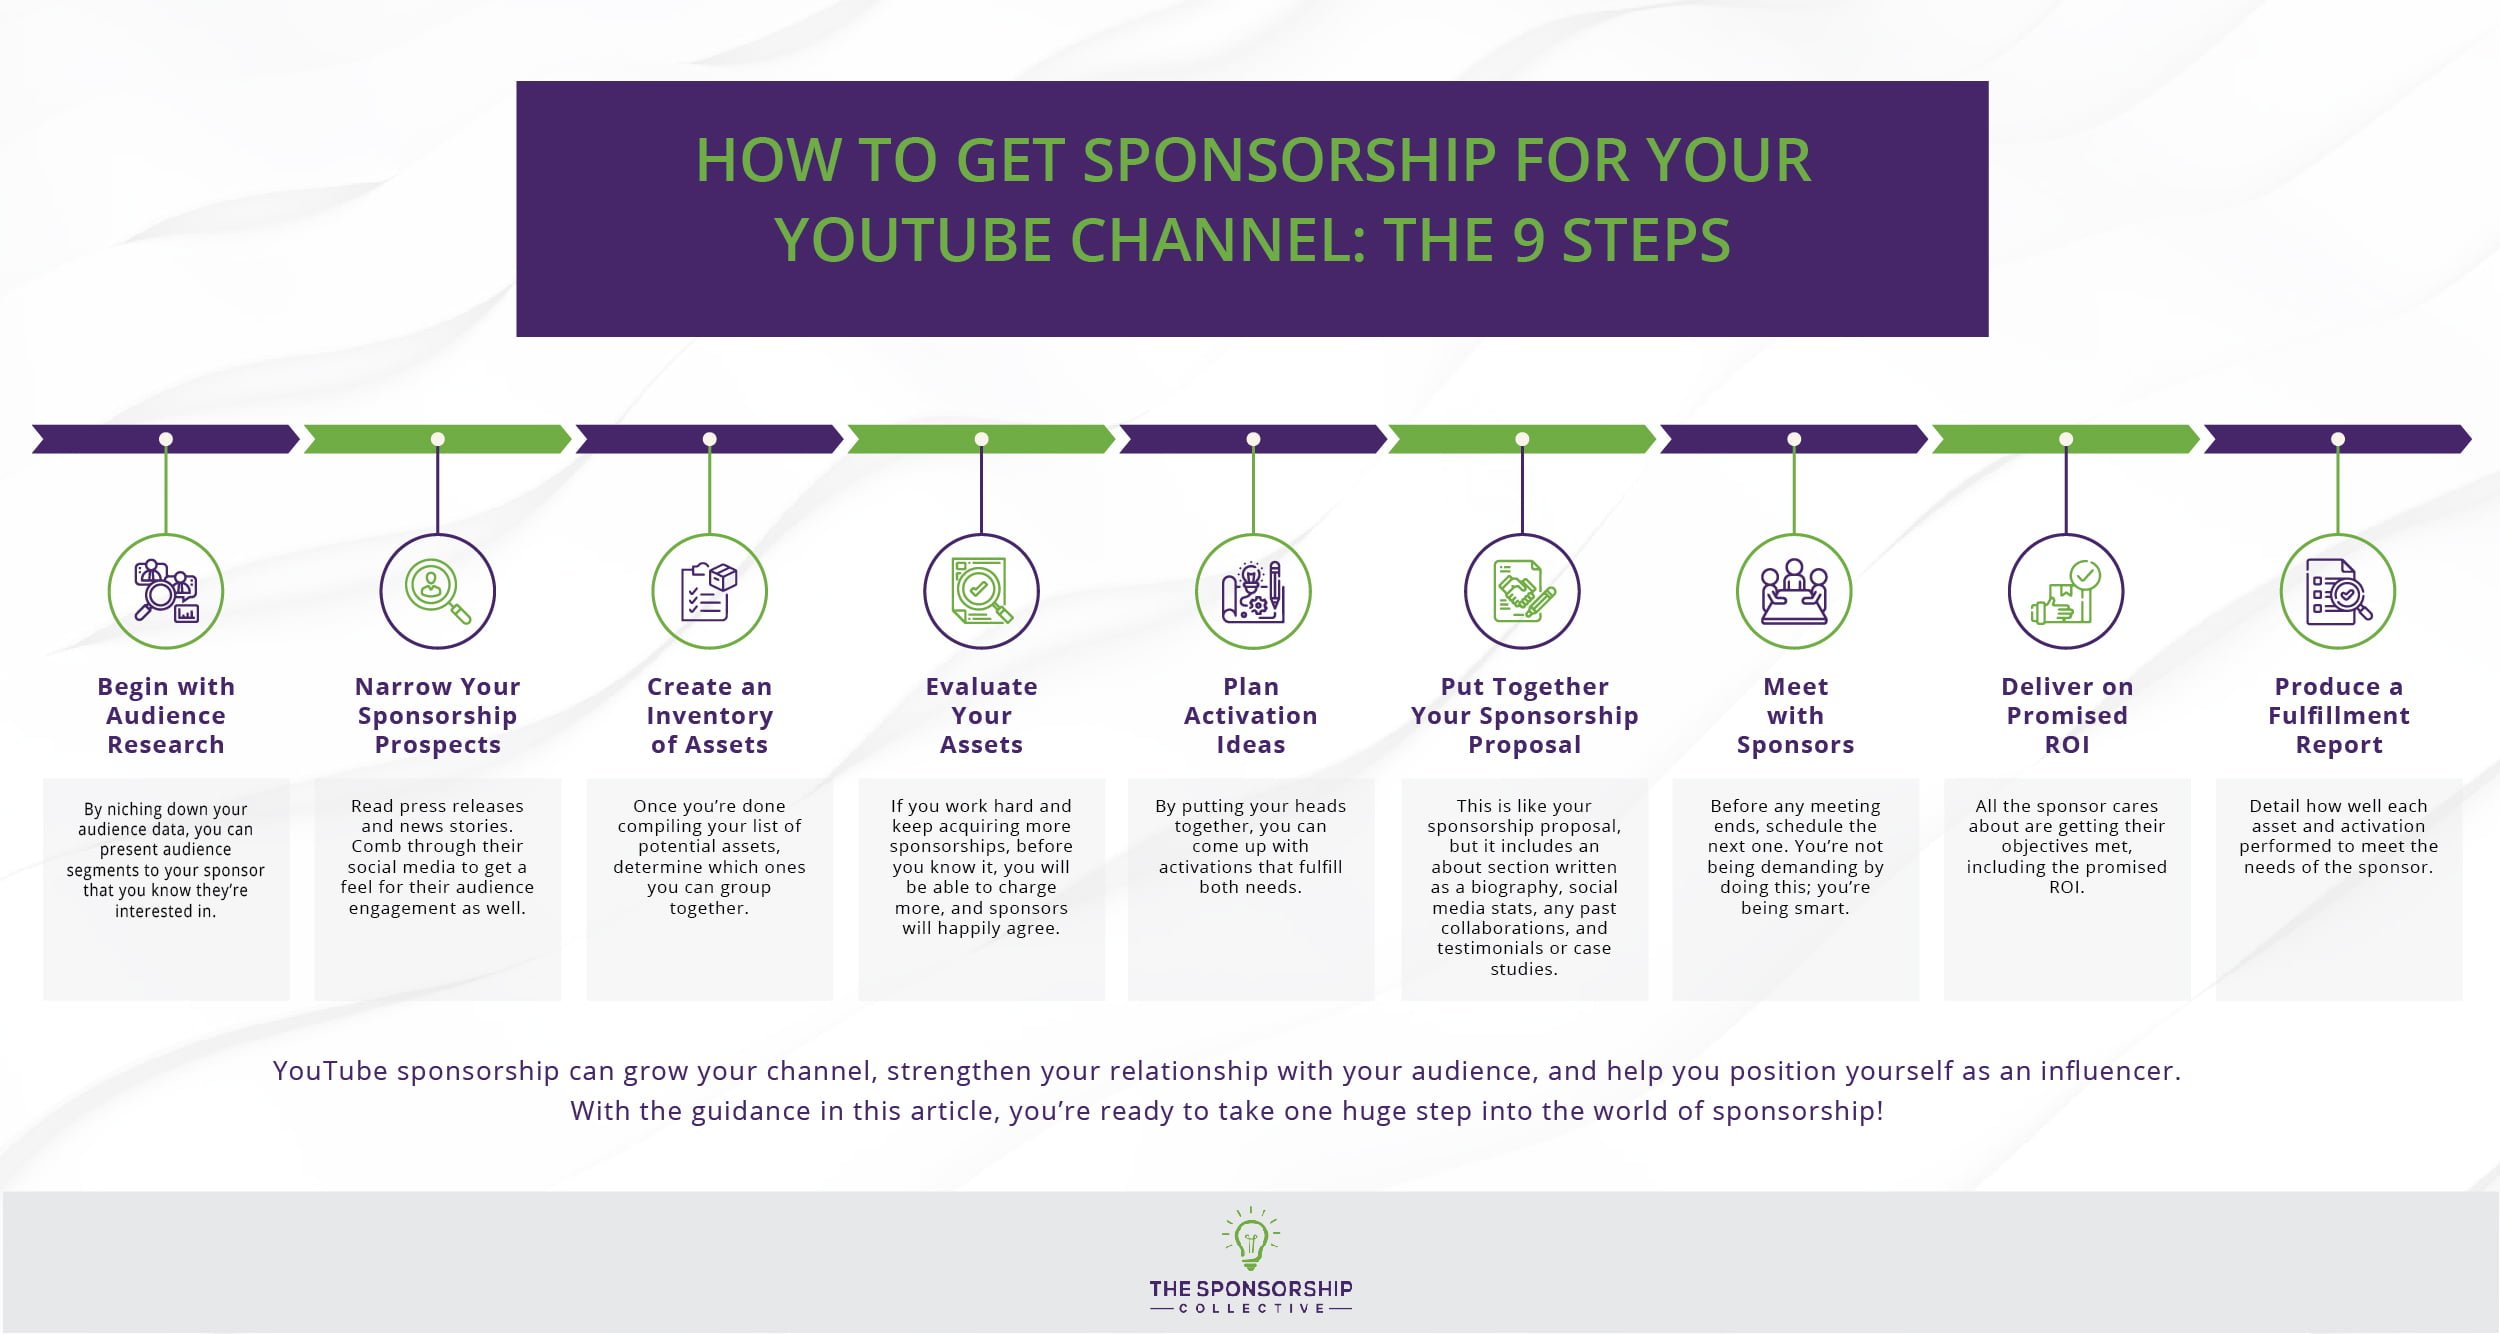 How to Get Sponsorship for Your YouTube Channel 